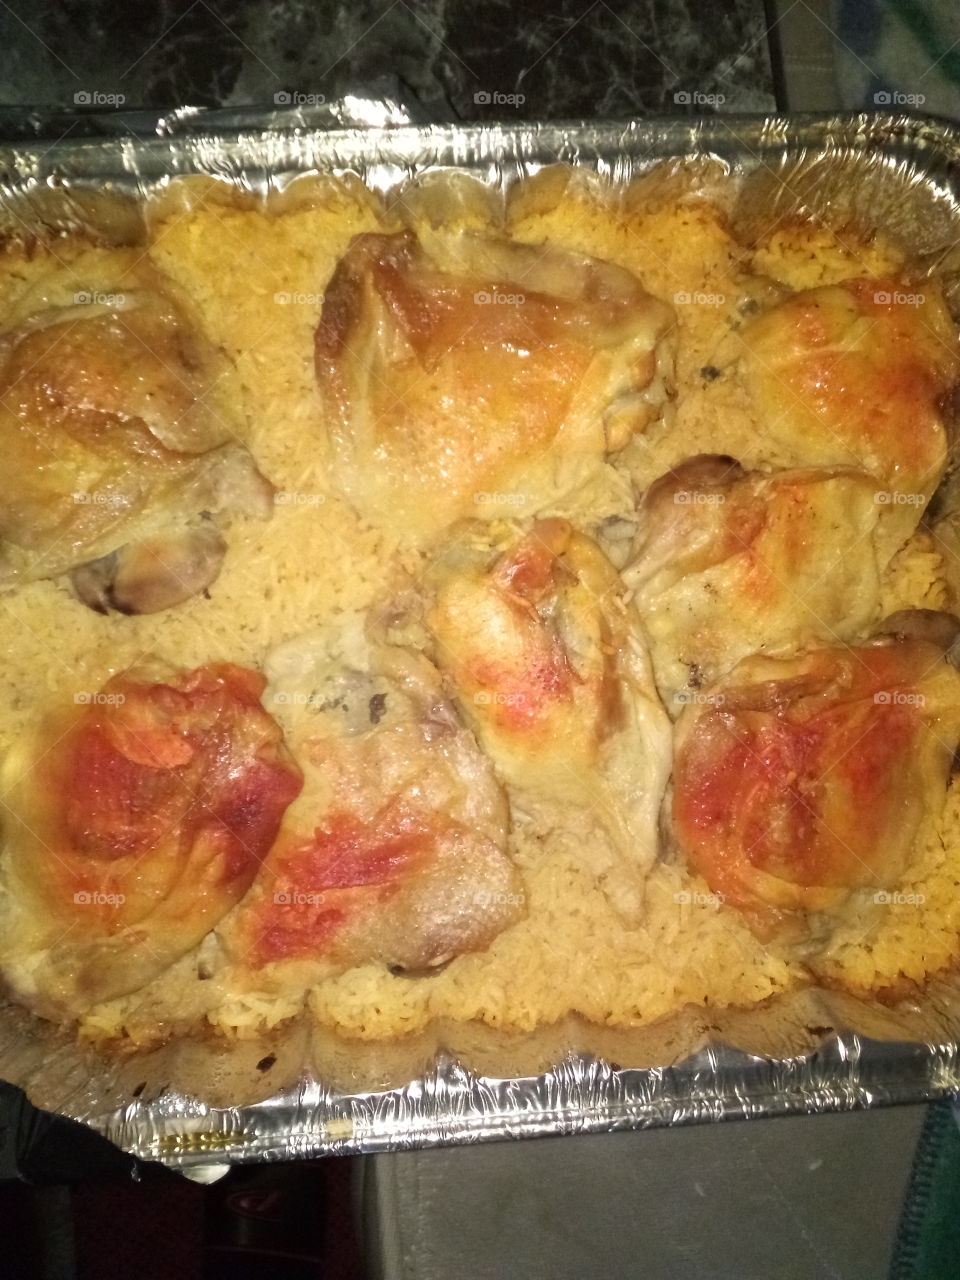 fresh out of the oven at 6:07am est chicken thighs and yellow rice